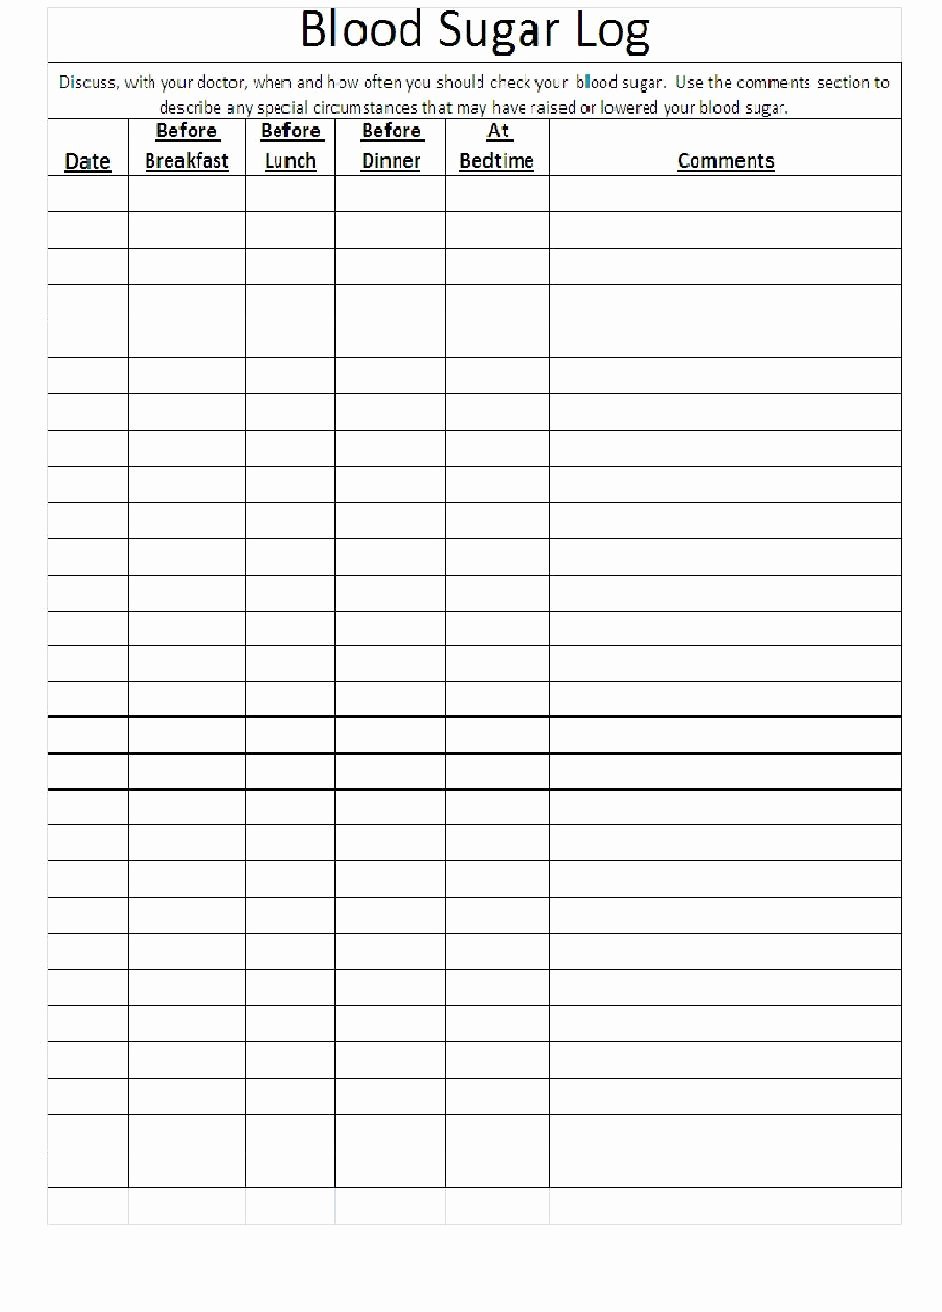 Blood Sugar Log Template Awesome for Patients – People S Health Centers